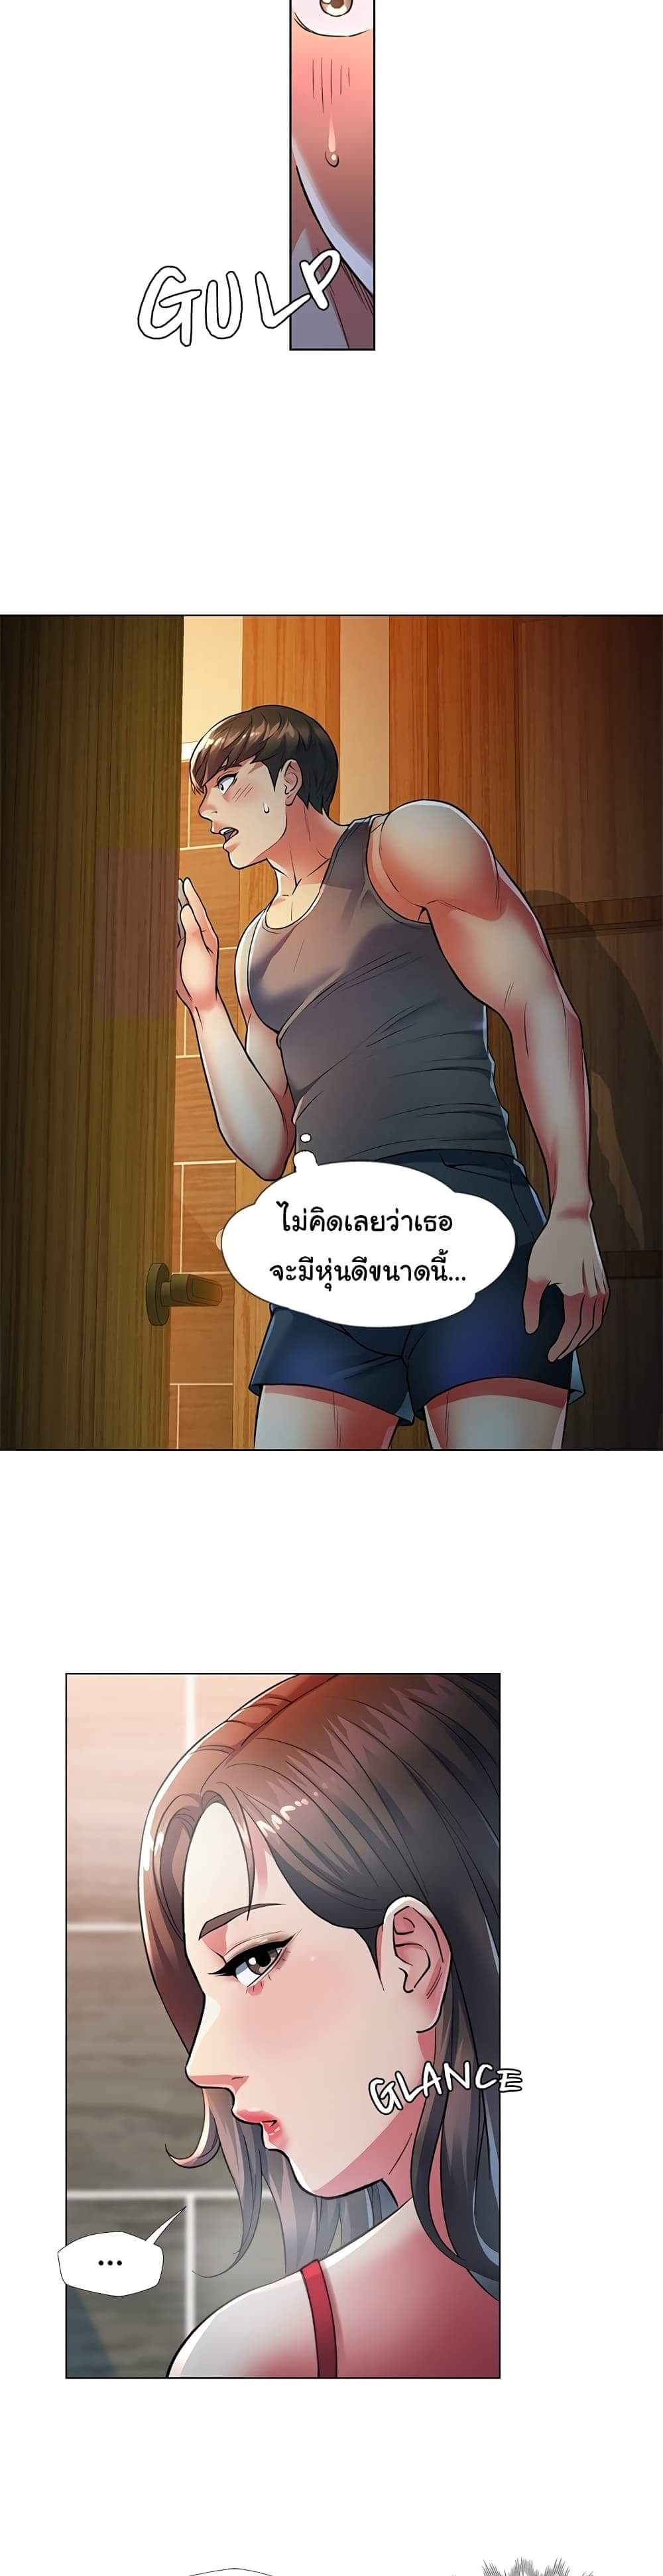 In Her Place ตอนที่ 0 ภาพ 5